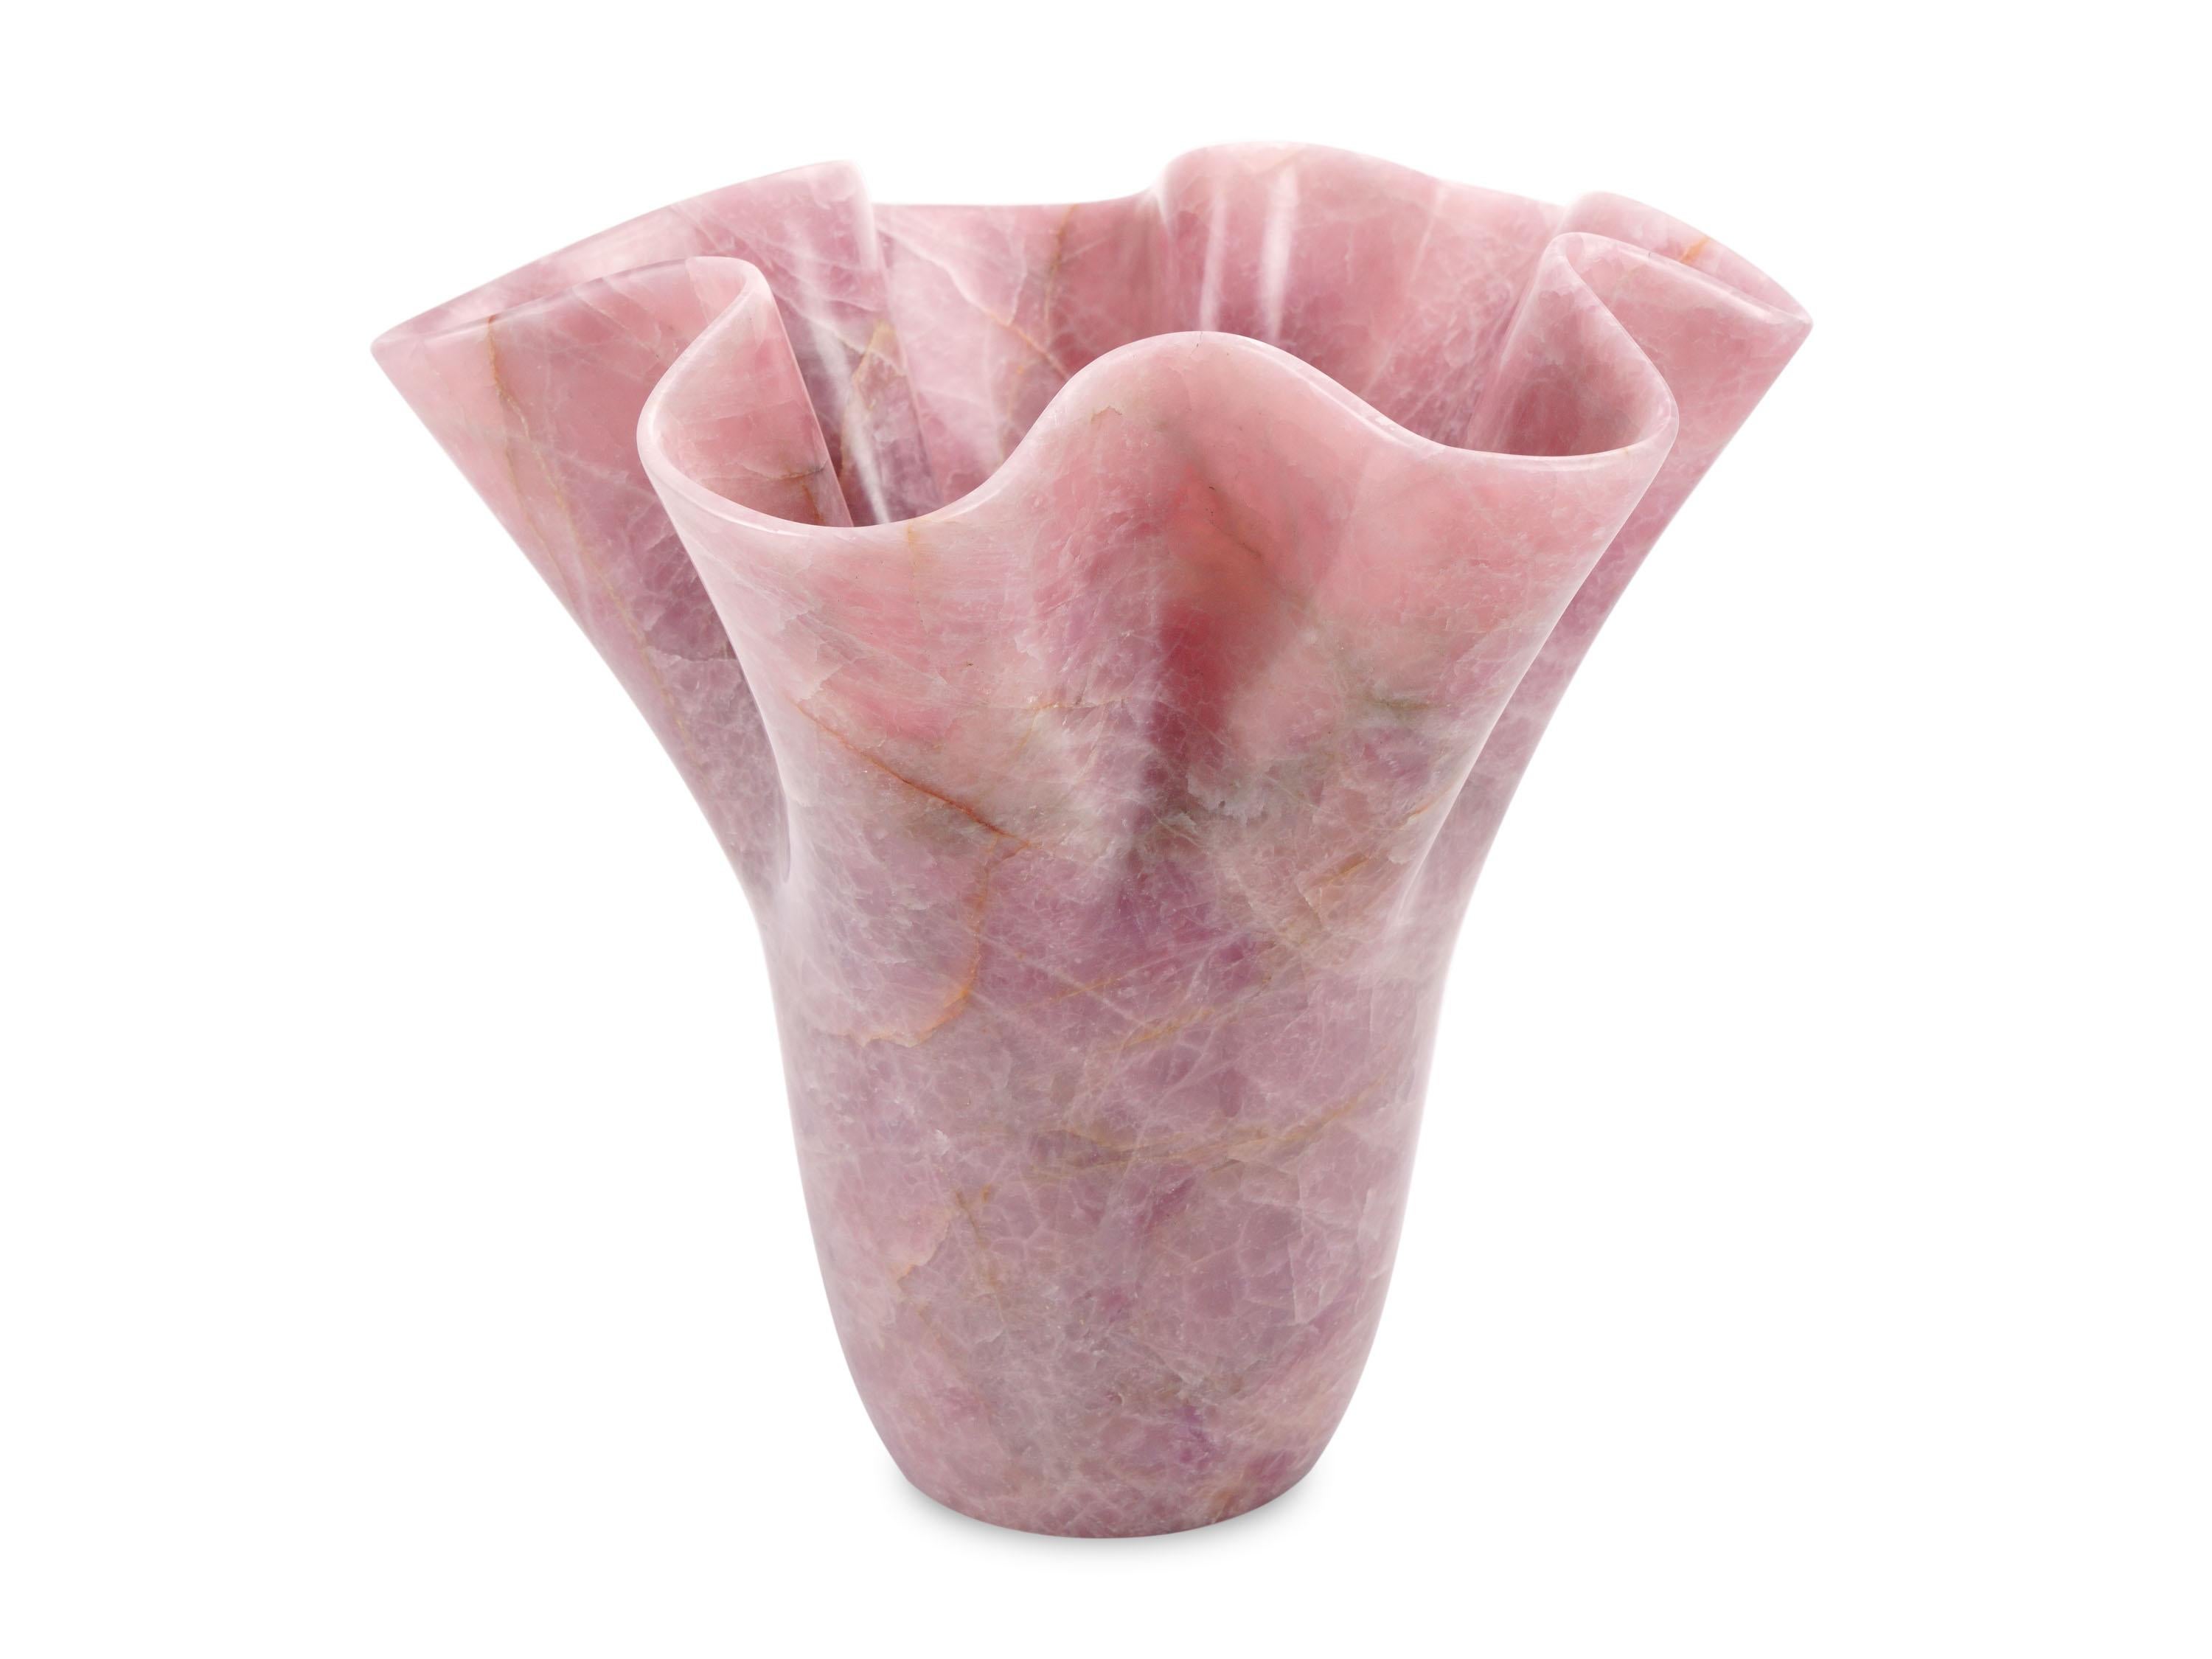 Vase Vessel Sculpture Pink Rose Quartz Marble Collectible Design Handmade Italy In New Condition For Sale In Ancona, Marche